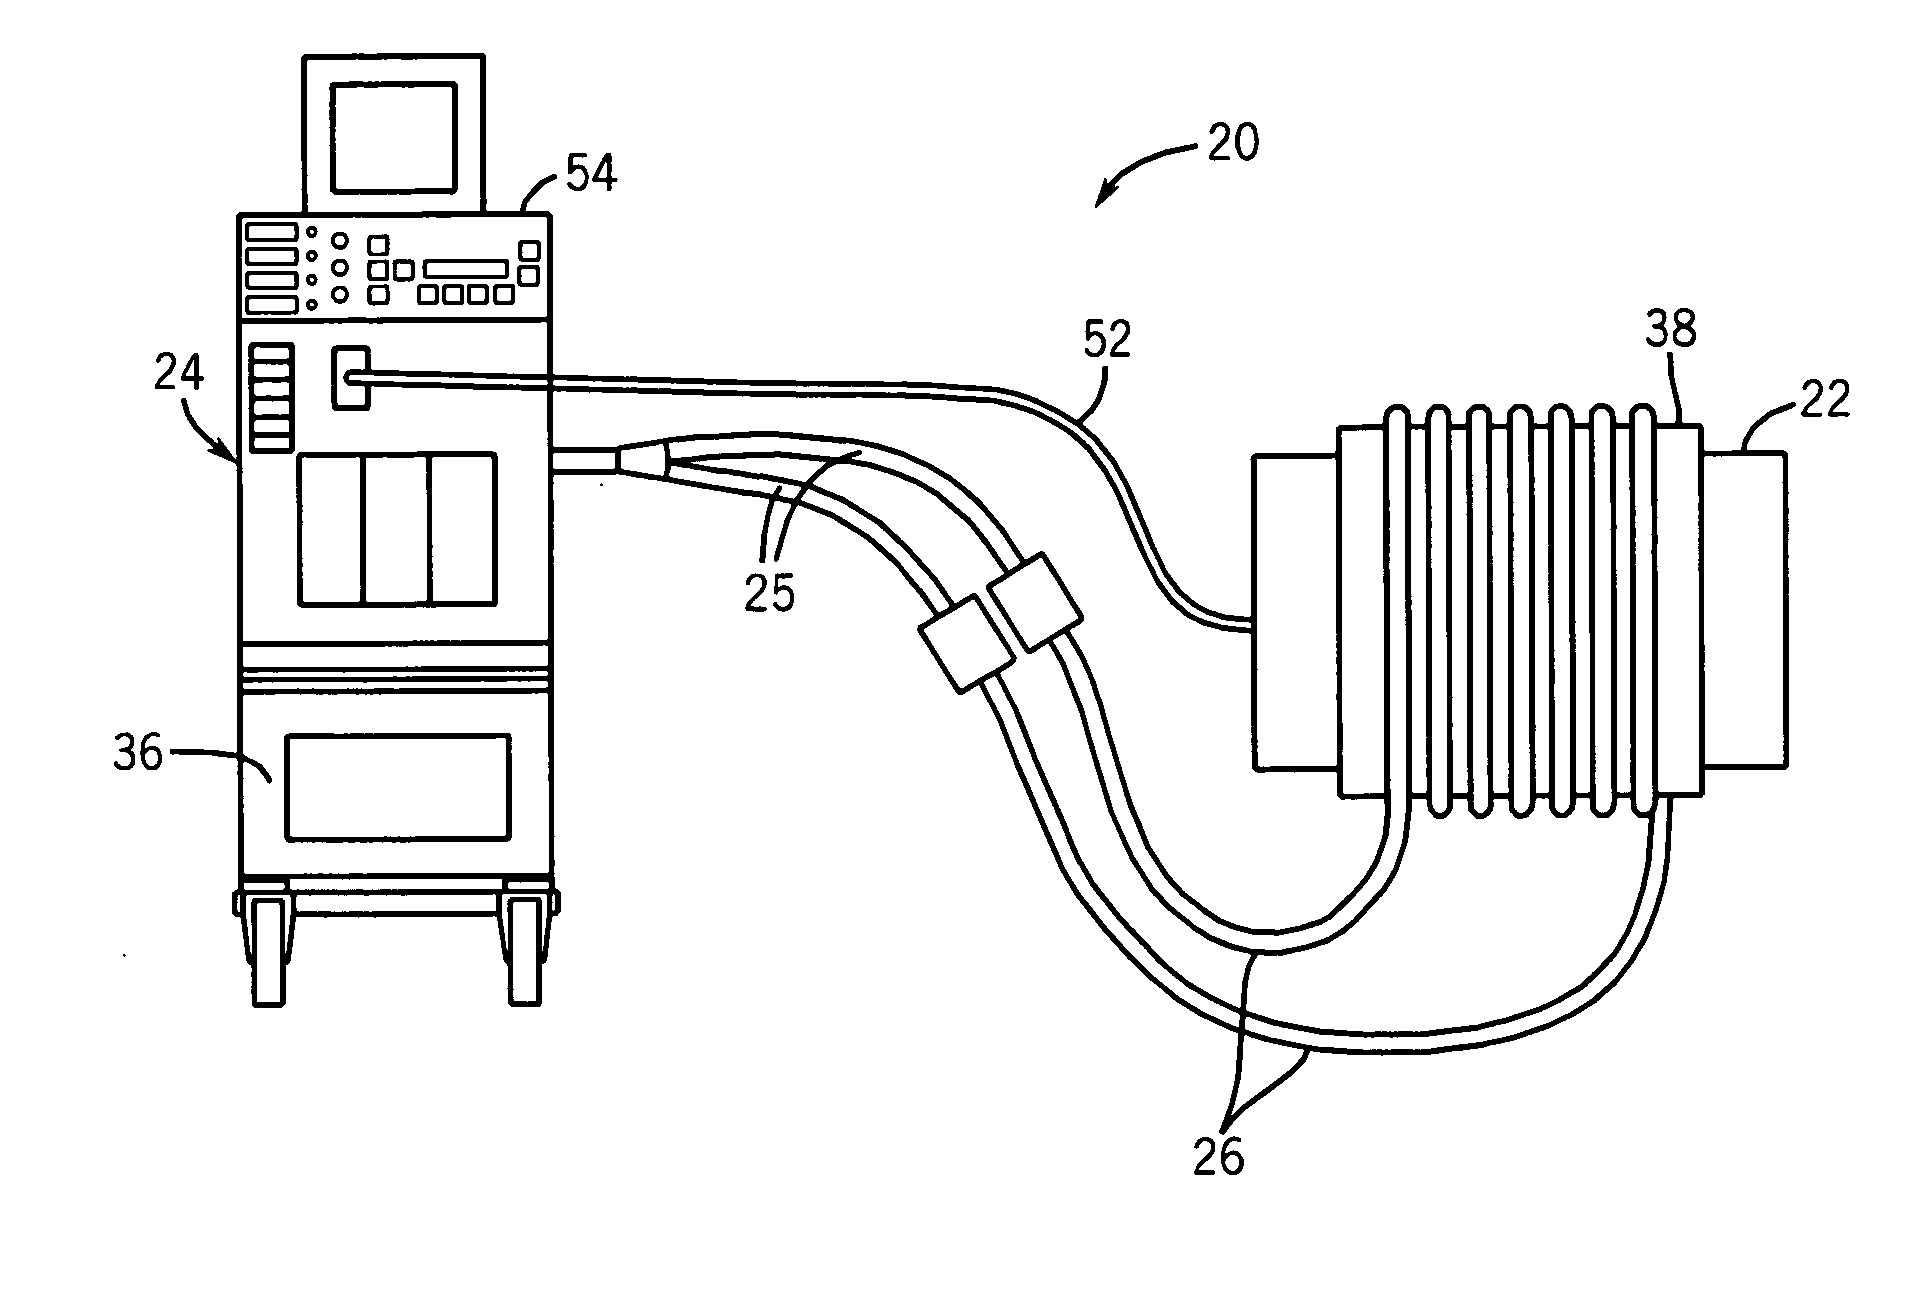 Induction heating system output control based on induction heating device